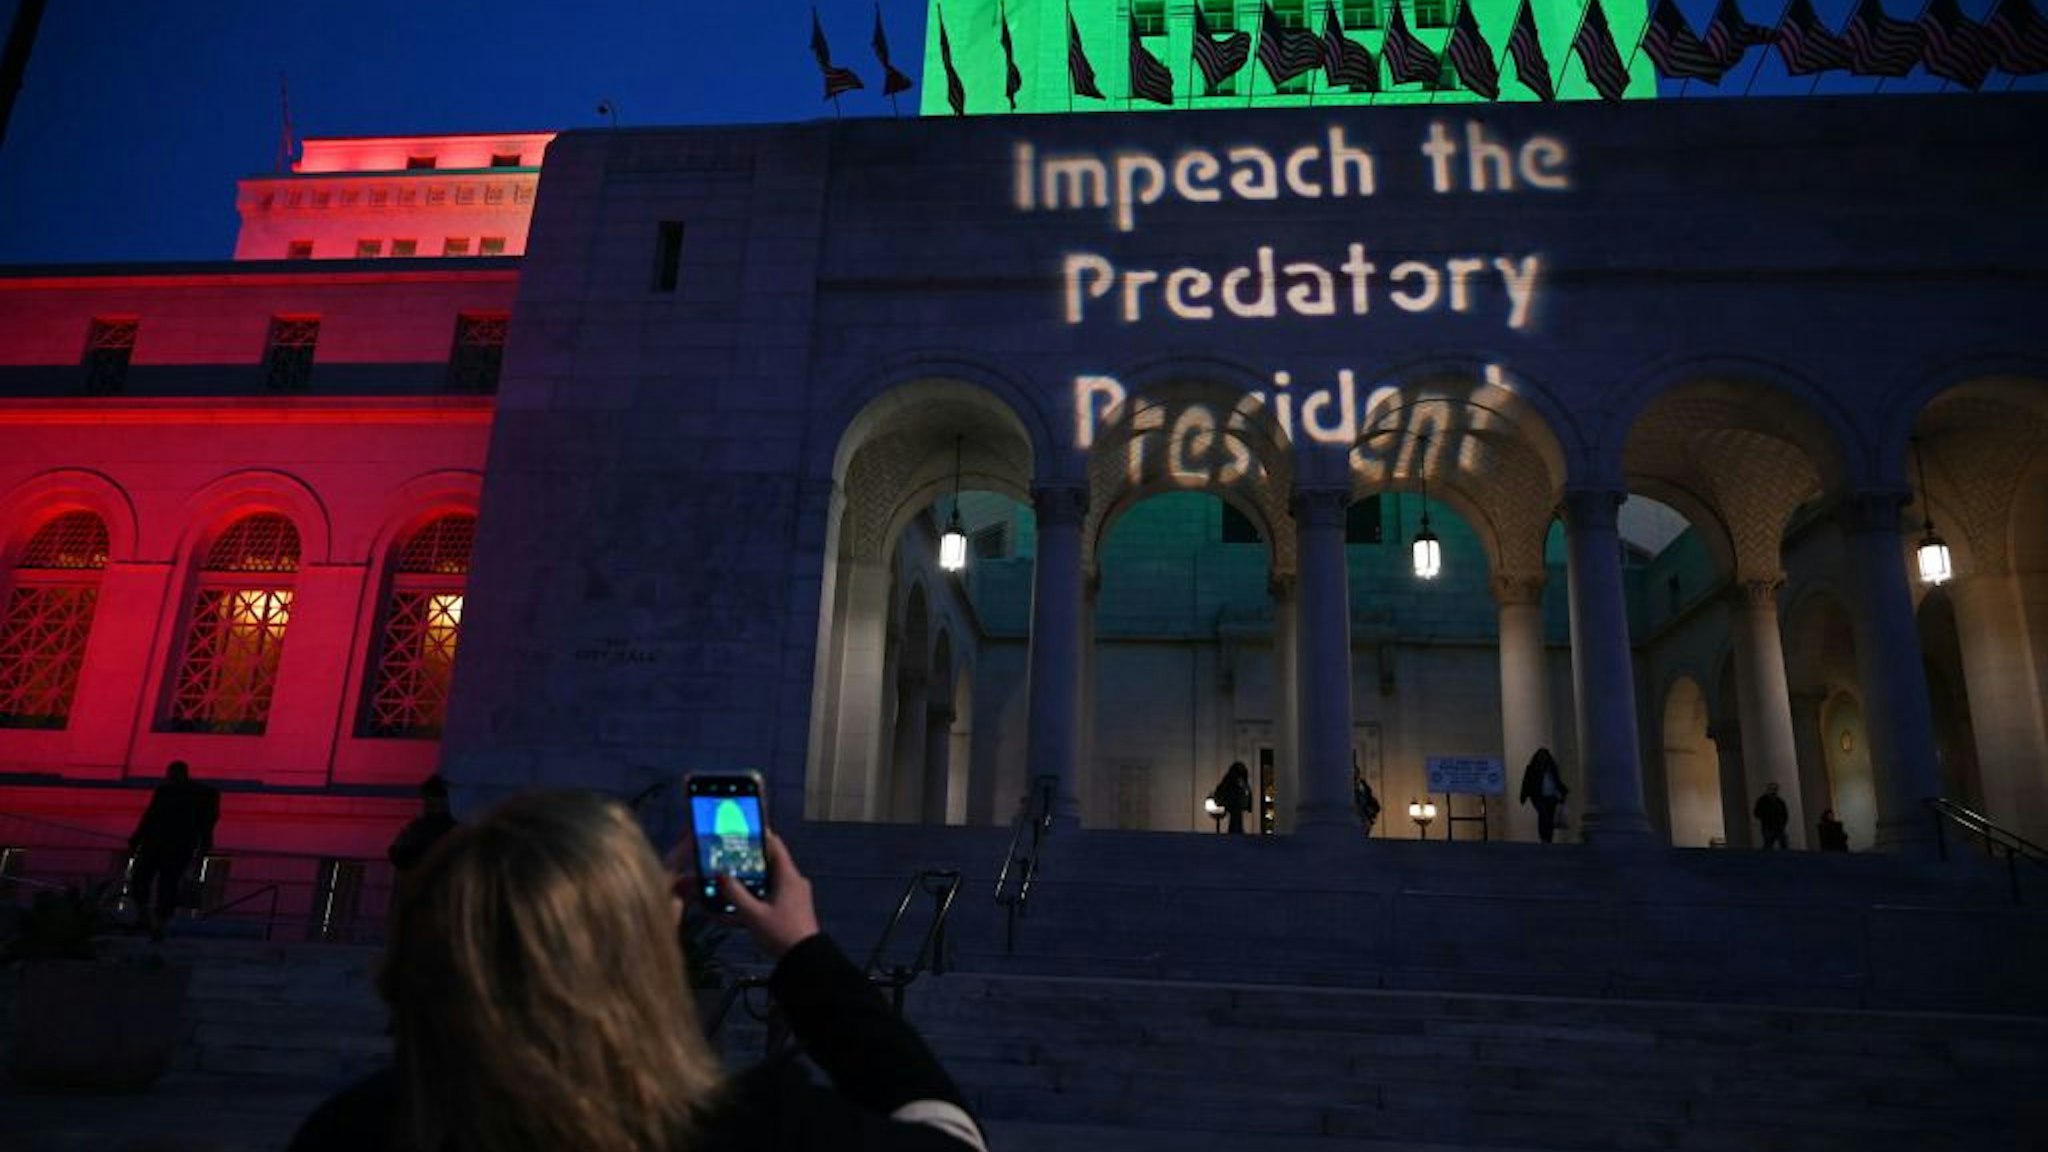 A message pro-impeachment is projected on the facade of the City Hall building before the start of a protest in Los Angeles on December 17, 2019.